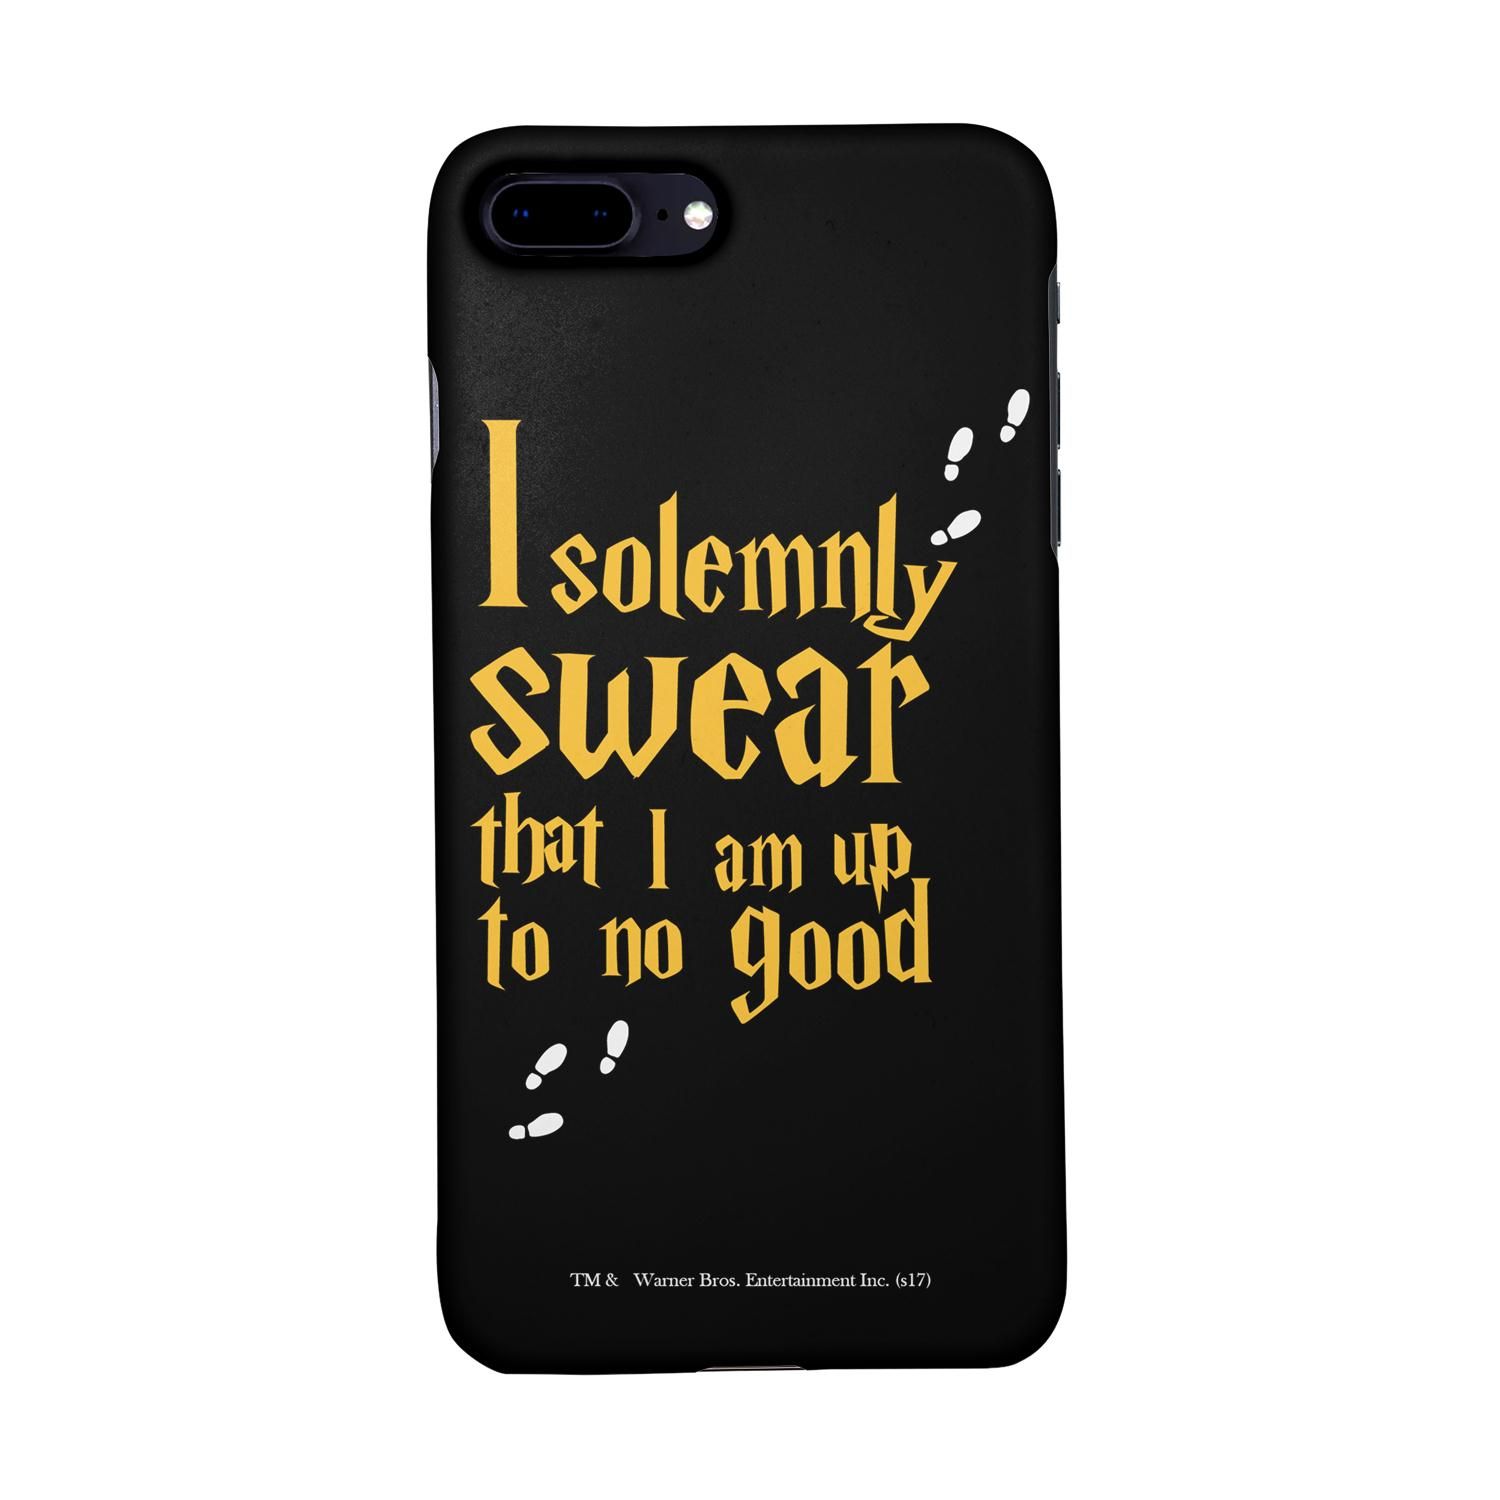 Buy Solemnly Swear - Sleek Phone Case for iPhone 8 Plus Online